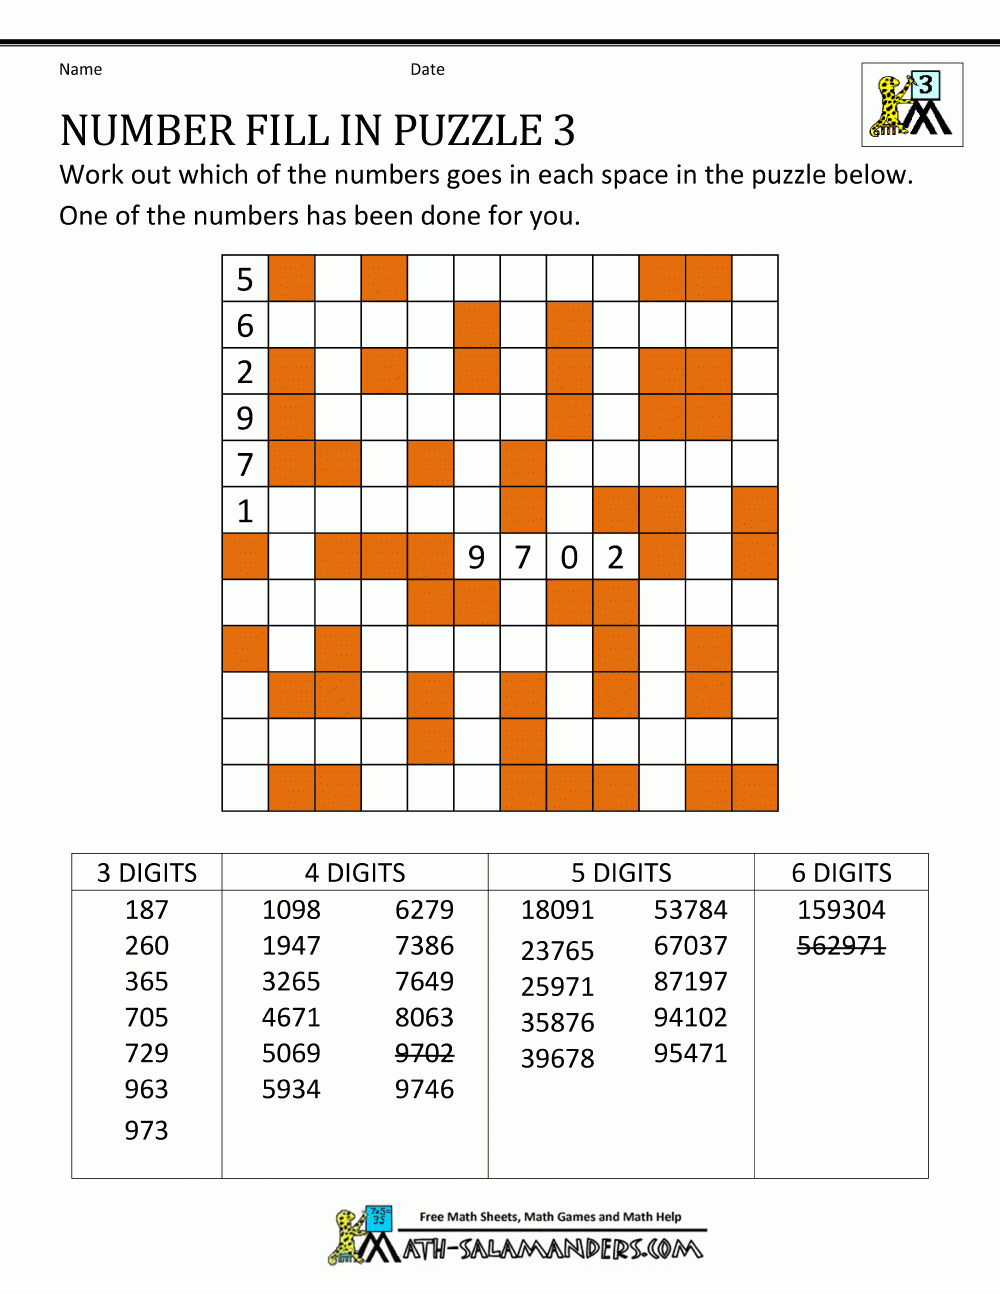 Math Puzzles For Kids Number Fill In Puzzle 3 | Spot The . Games - Printable Crossword #3